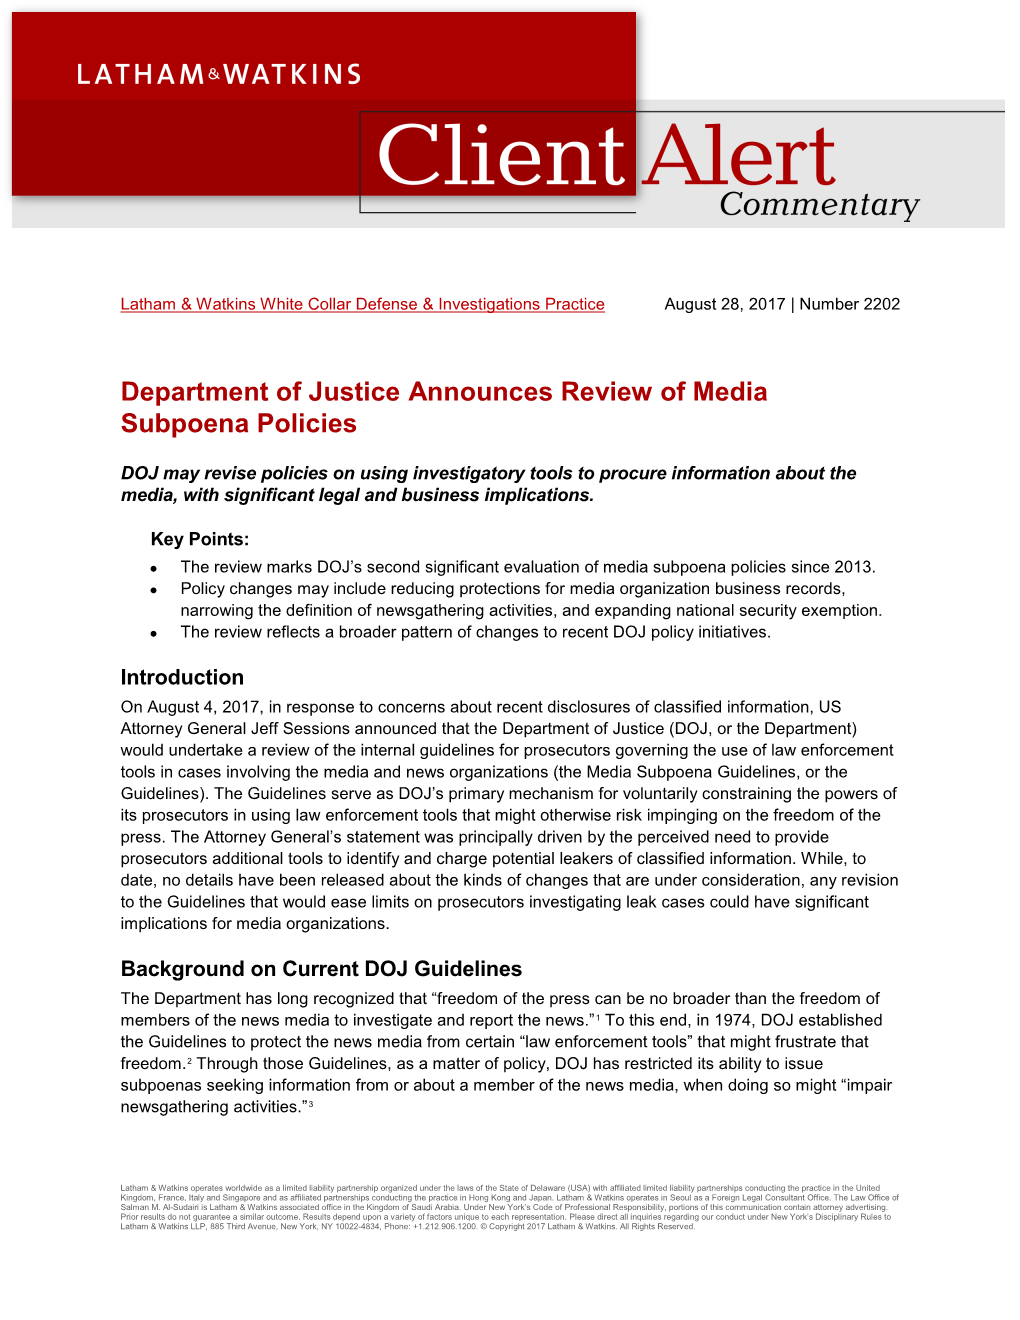 Department of Justice Announces Review of Media Subpoena Policies